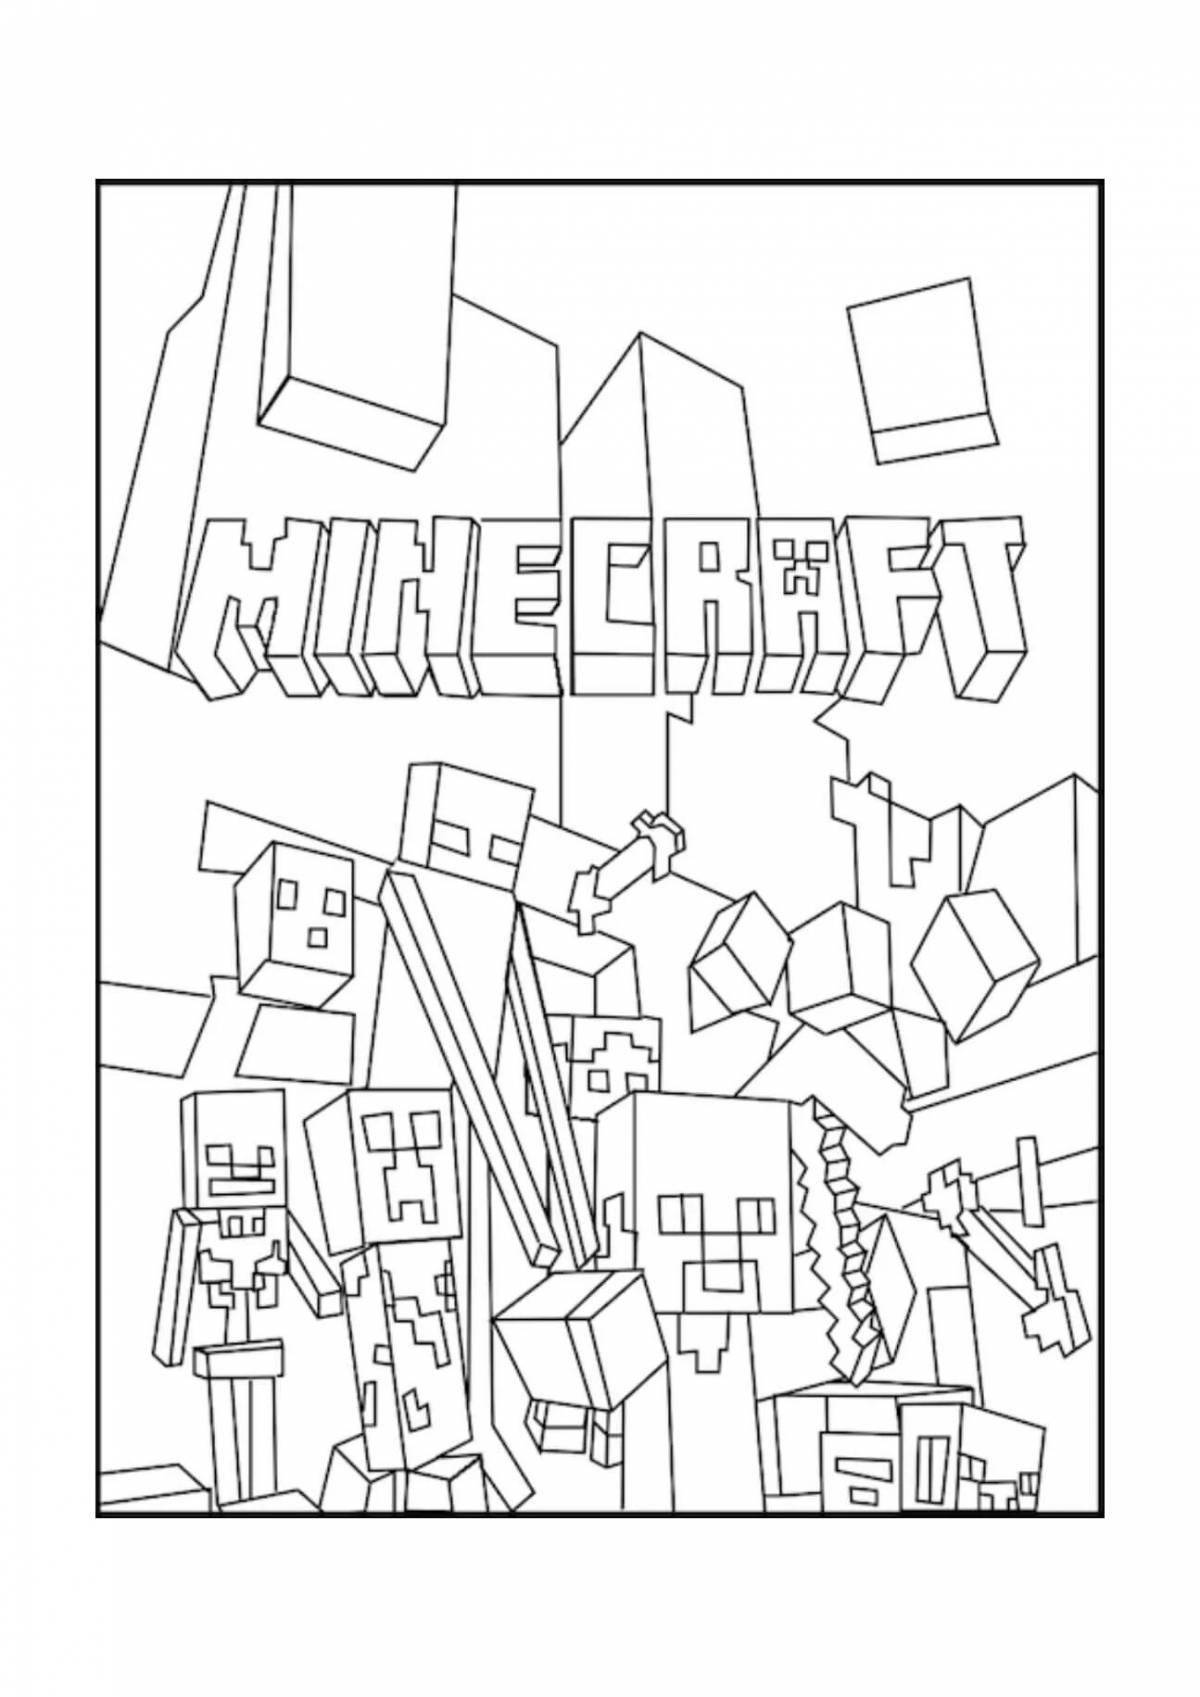 Color dream minecraft villagers coloring page